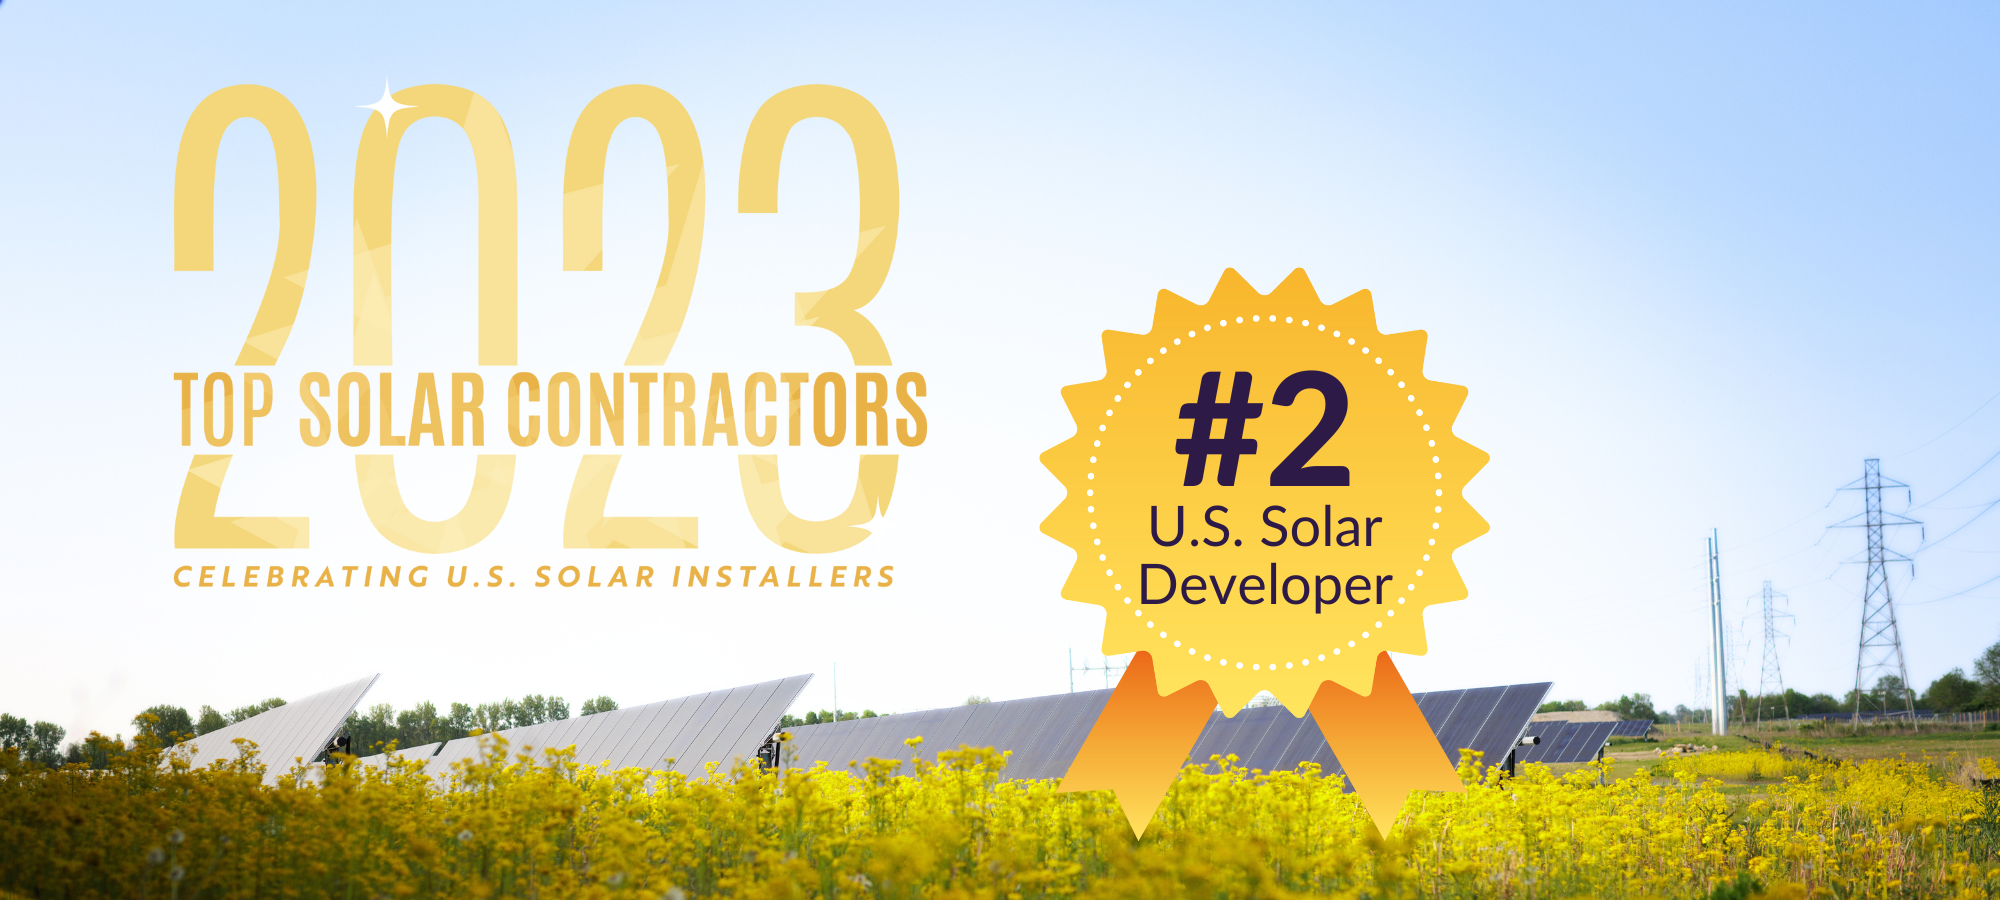 Lightsource bp ranked on Top Solar Contractors list as #2 utility-scale solar developer in the USA